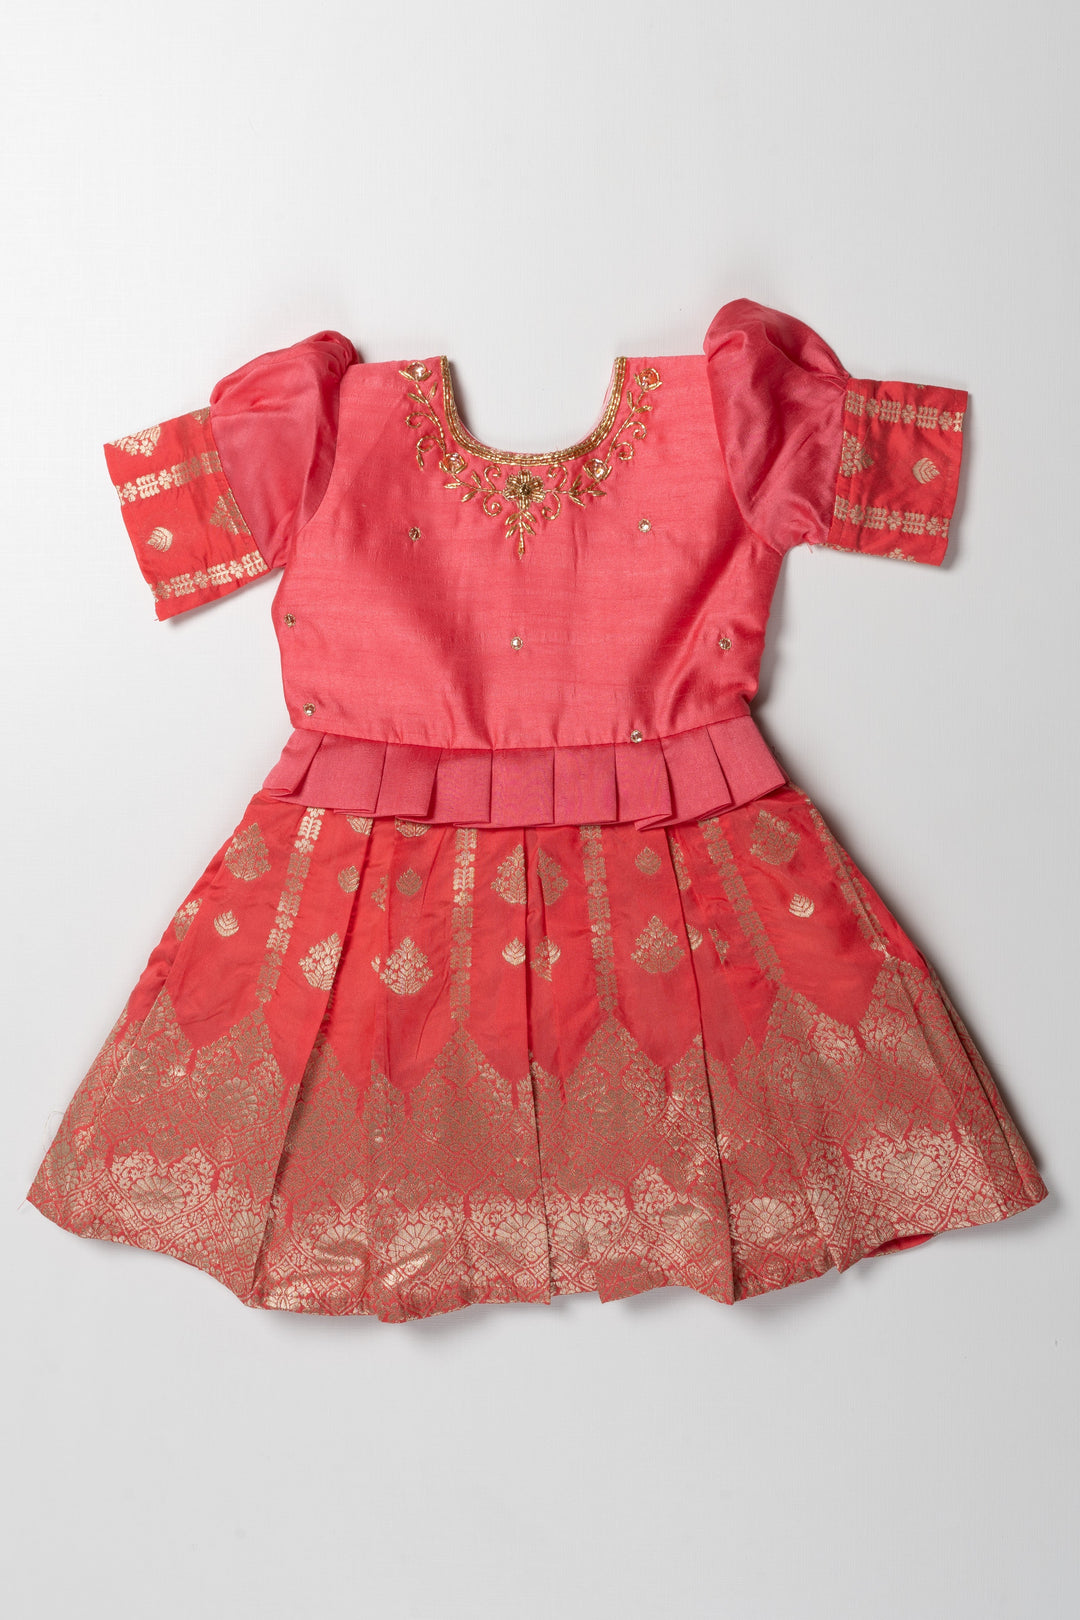 The Nesavu Silk Party Frock Enchanting Coral Silk Frock for Girls: Gold Embroidery and Elegant Festive Design Nesavu Shop Girls Coral Silk Dress with Gold Embroidery | Elegant Wedding and Festive Attire for Kids | The Nesavu